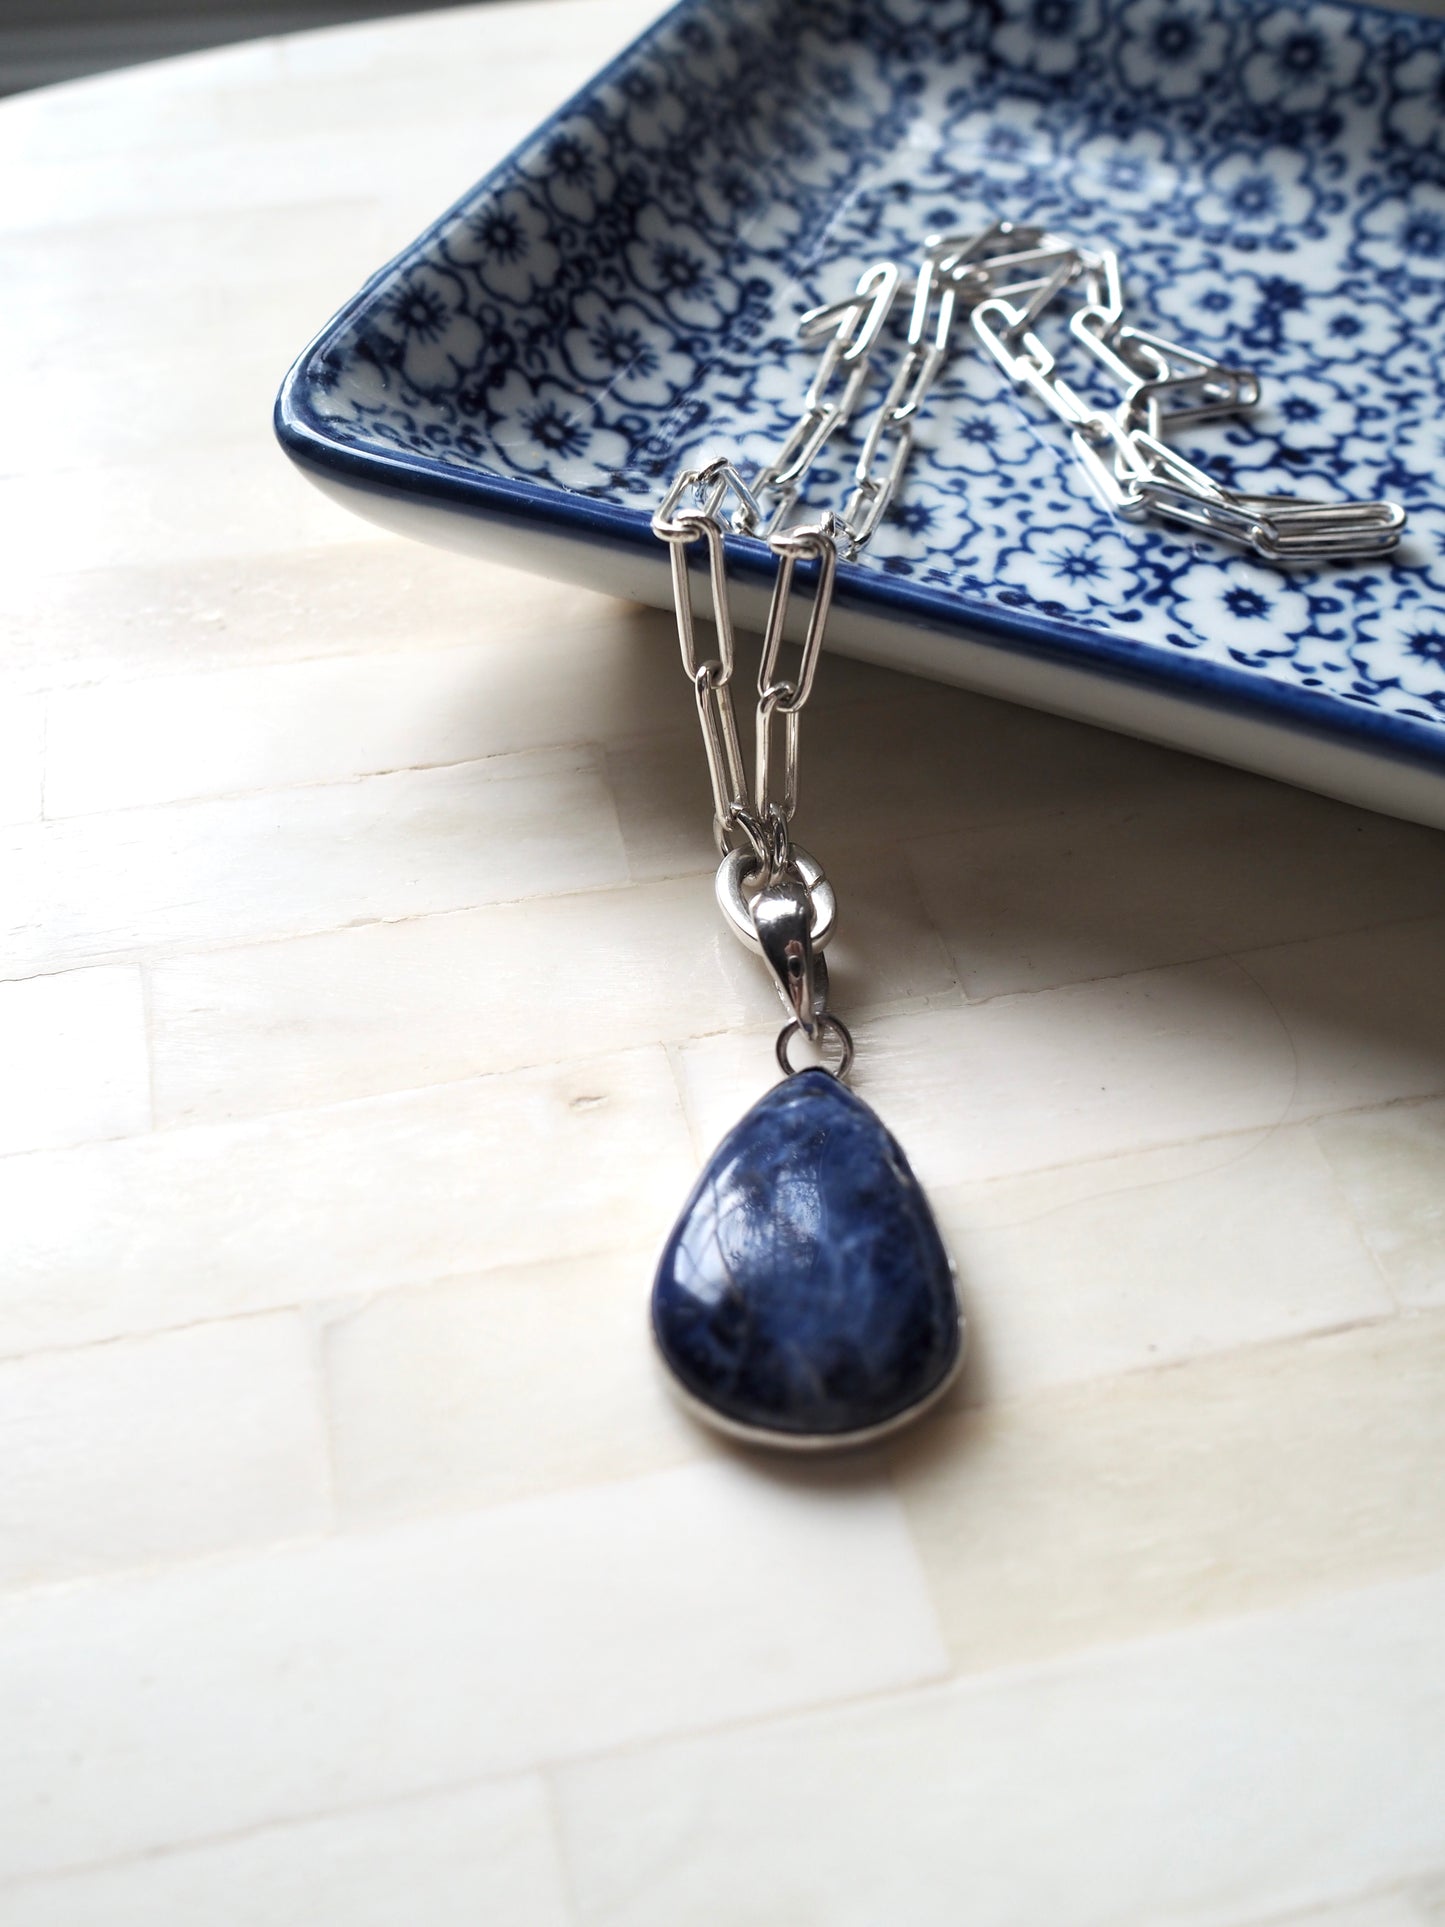 Paperclip Necklace with Sodalite Pendant